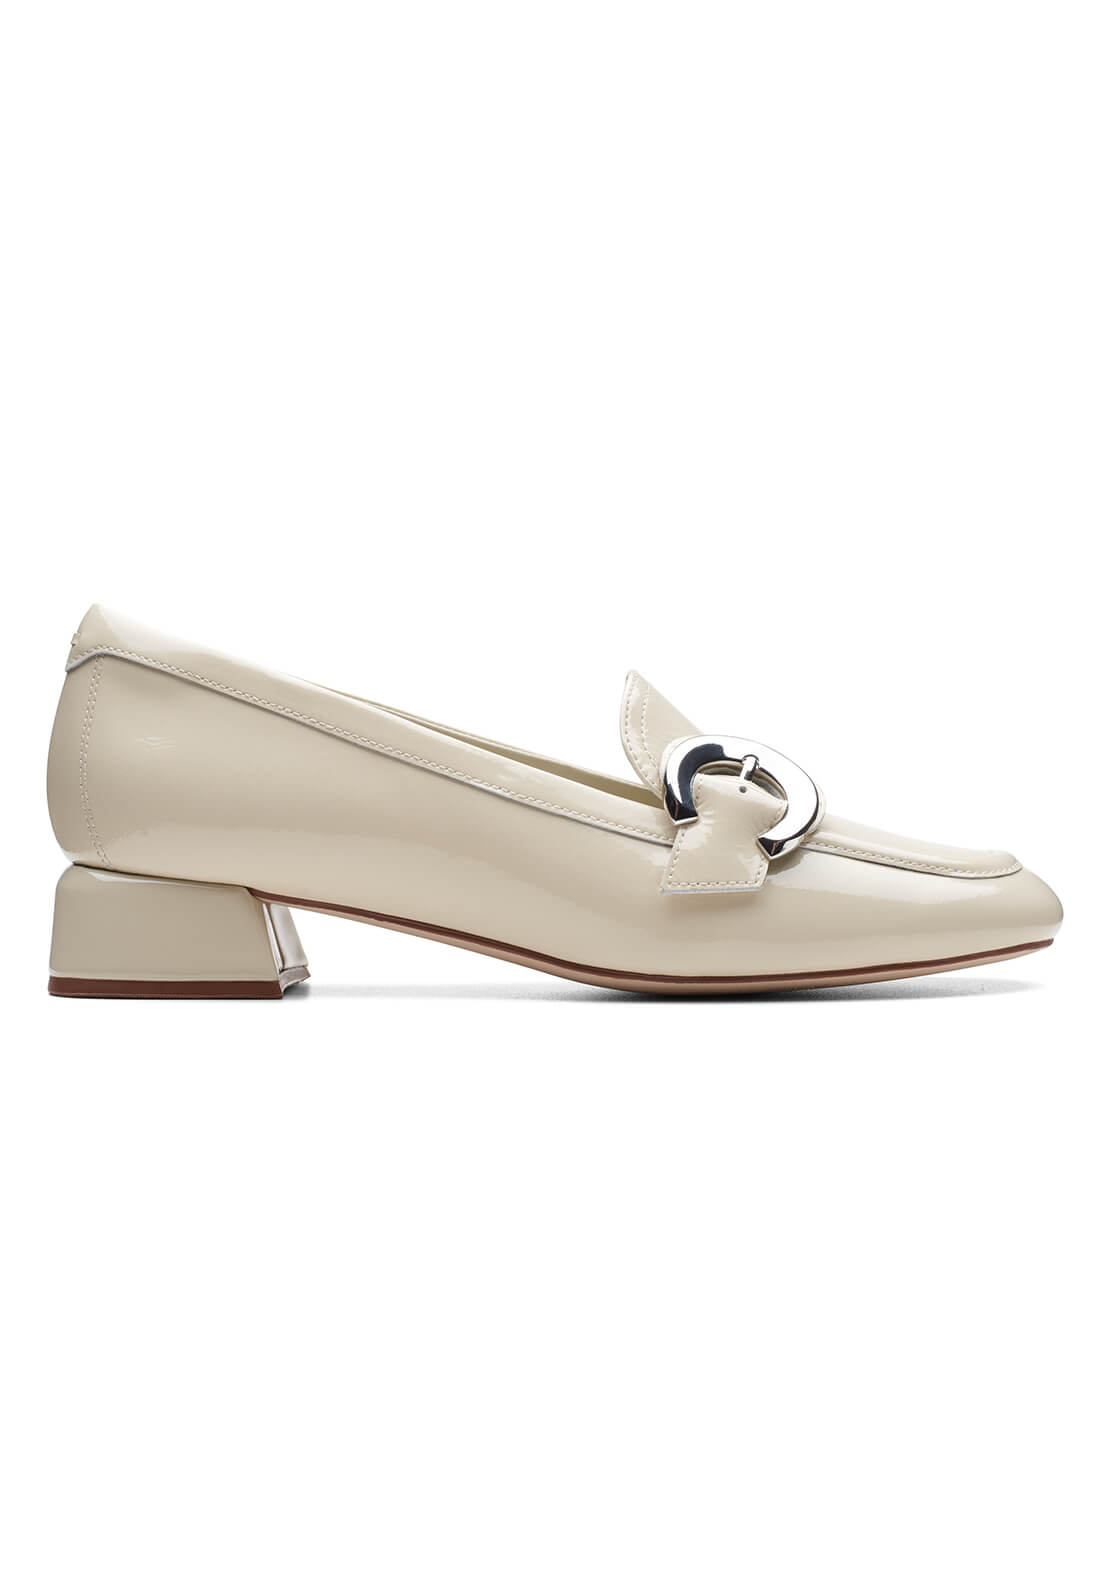 Clarks Daiss30 Trim Heeled Loafer - Ivory 3 Shaws Department Stores